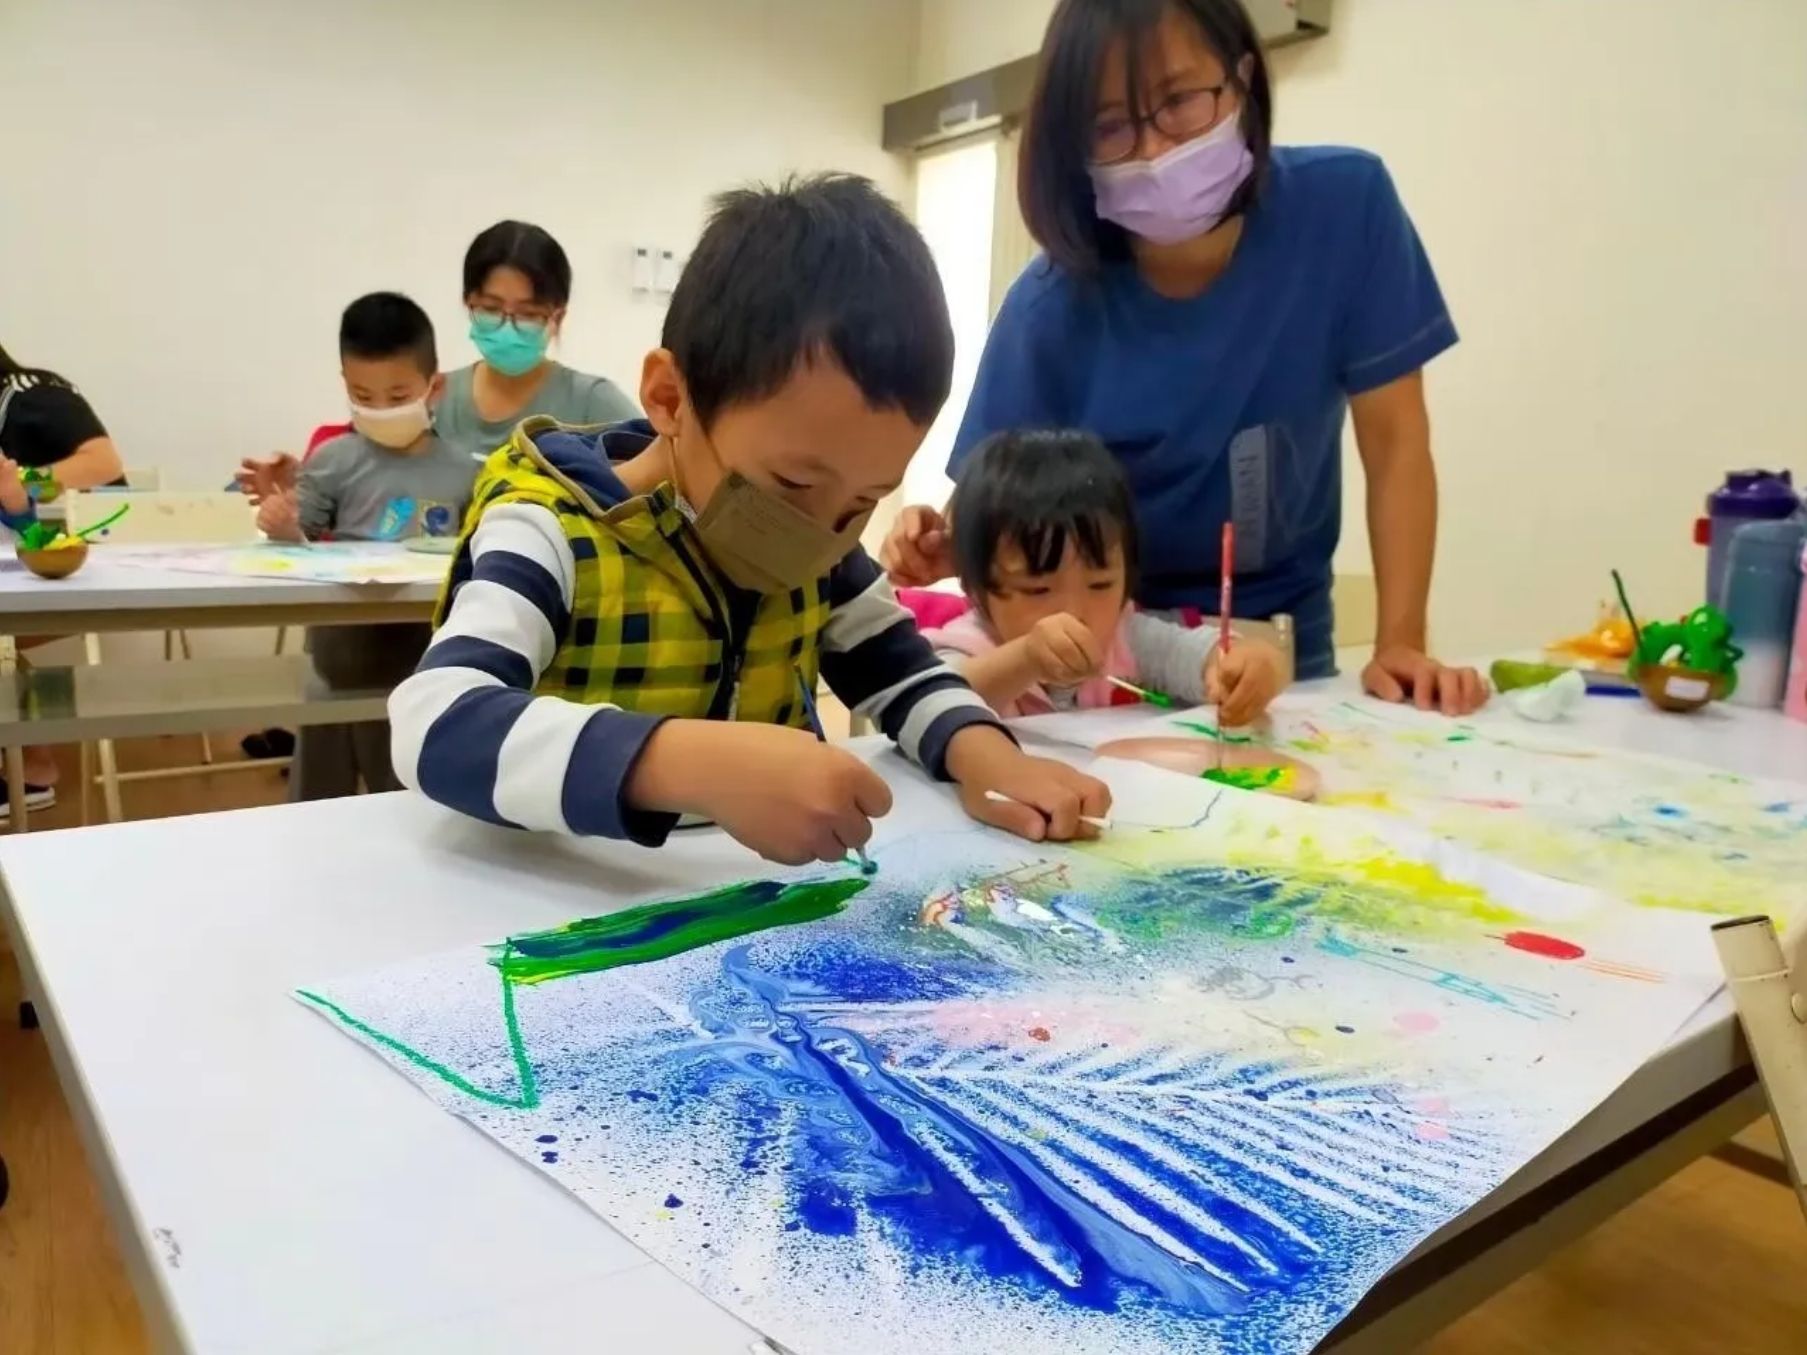 Our Art Therapy Classes Benefit Over a Thousand Participants